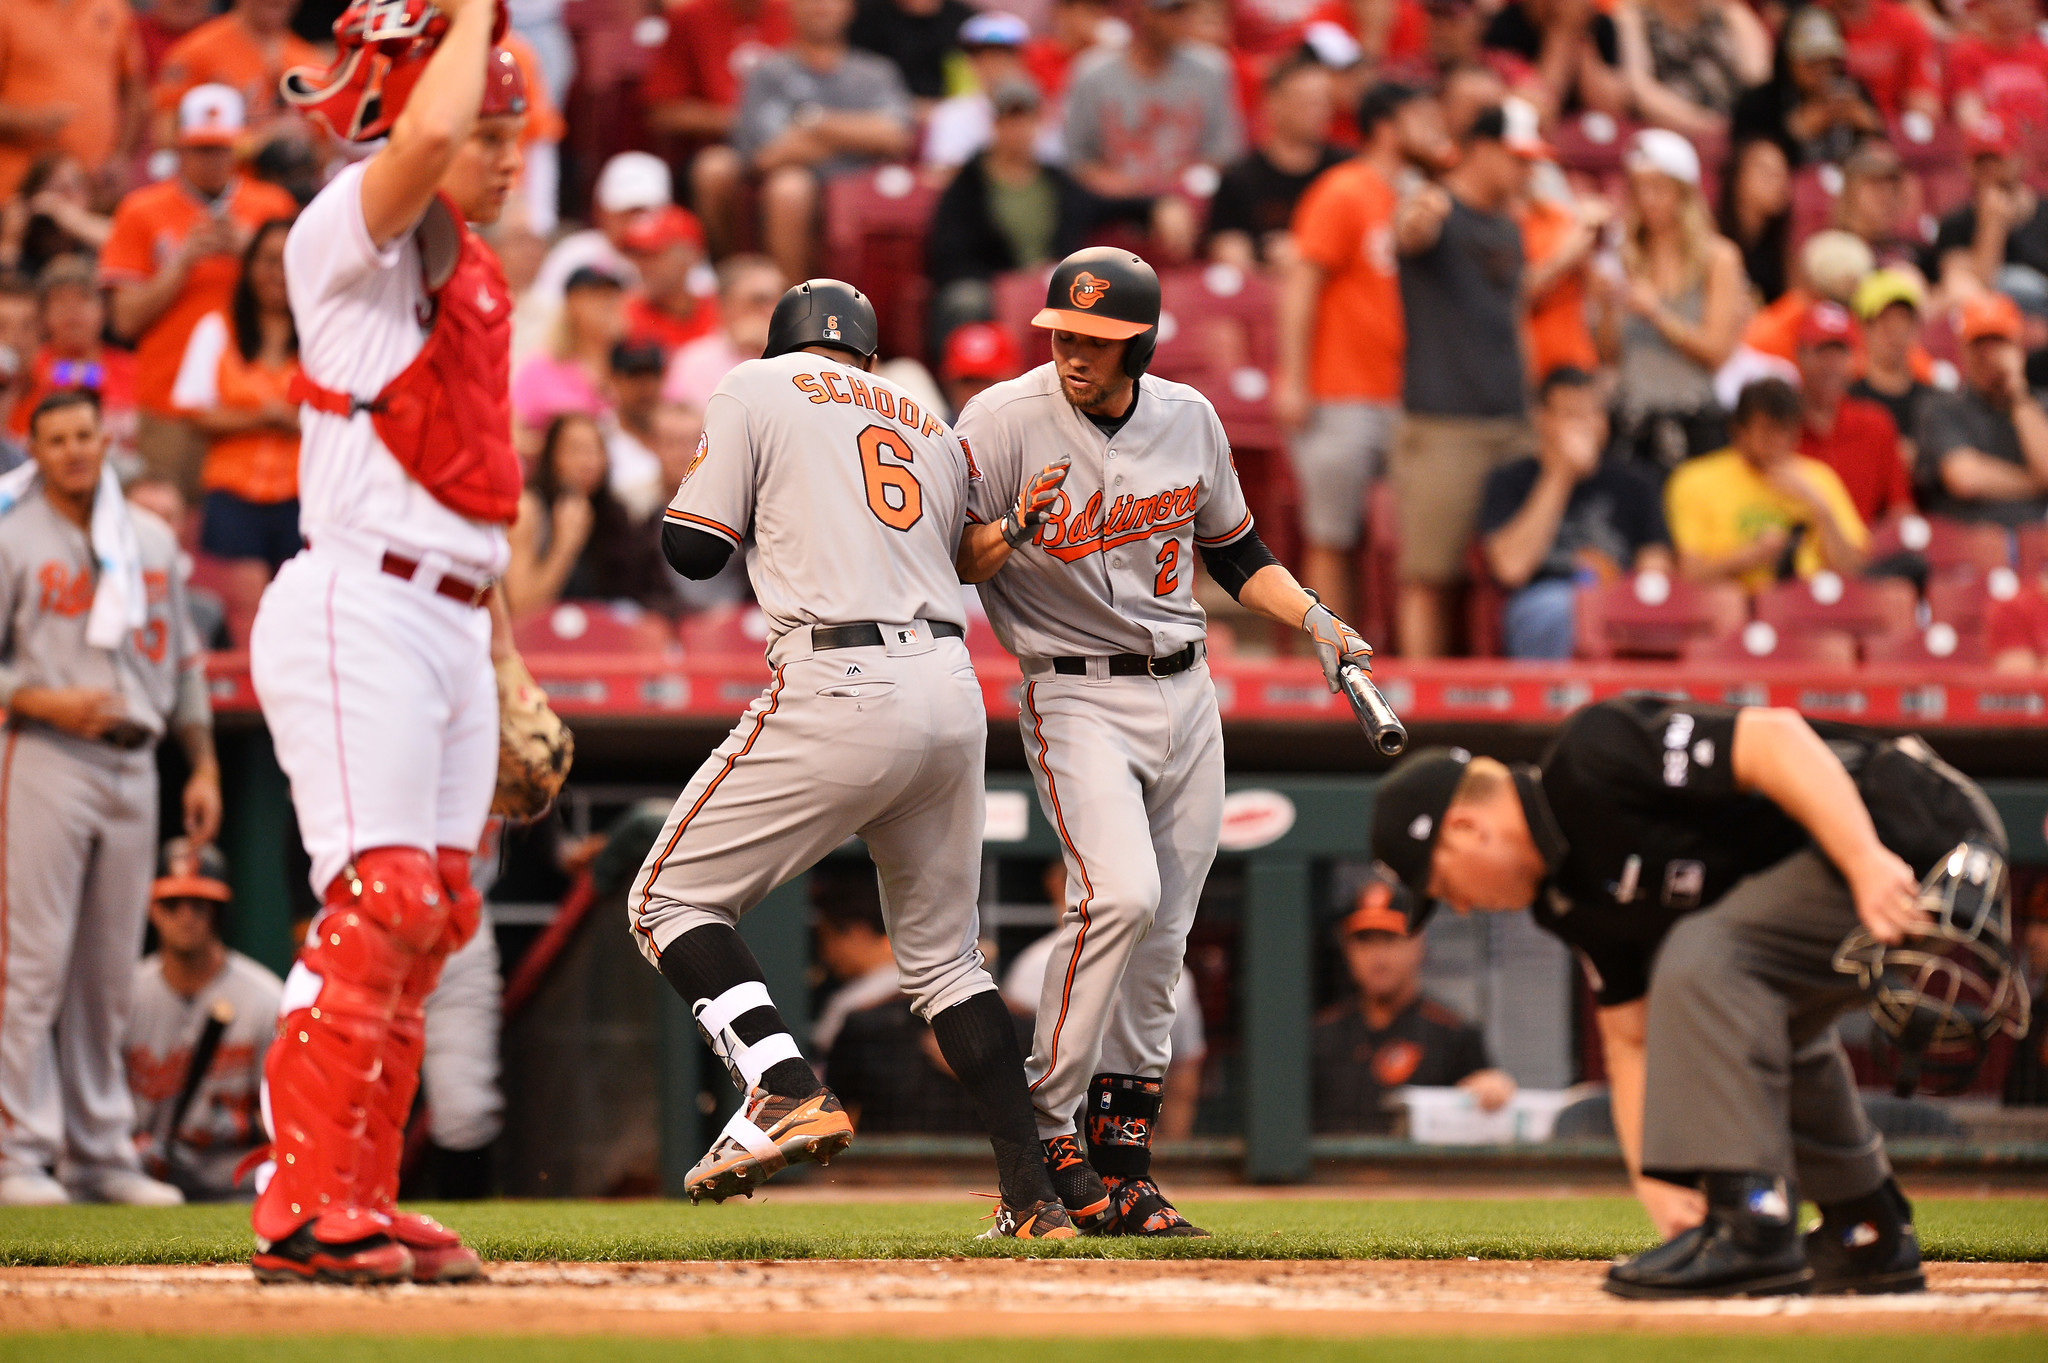 Orioles recap: J.J. Hardy's RBI single in 10th lifts Birds over Reds, 2-1